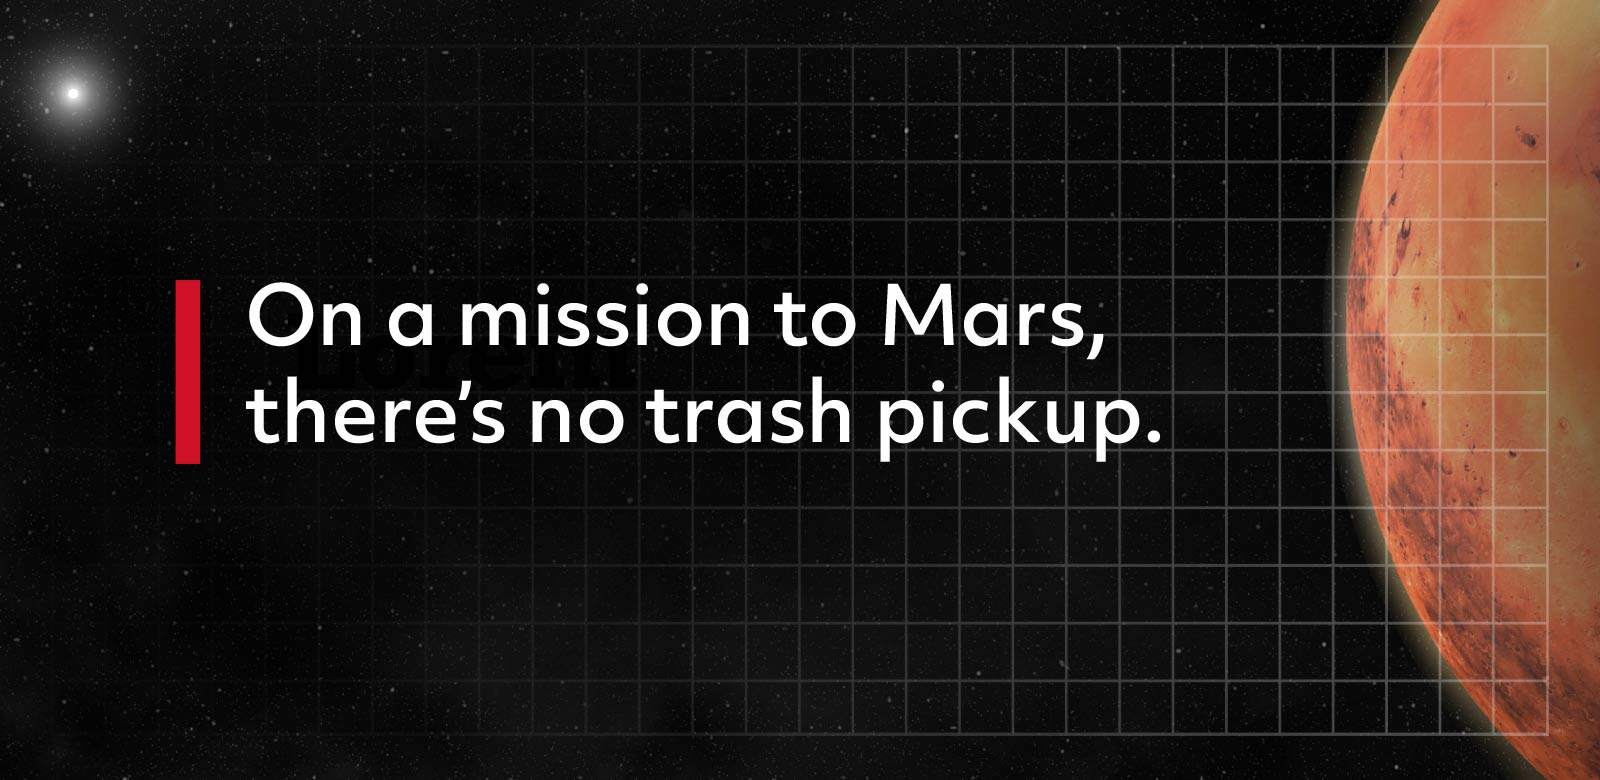 On a mission to Mars, there's no trash pickup